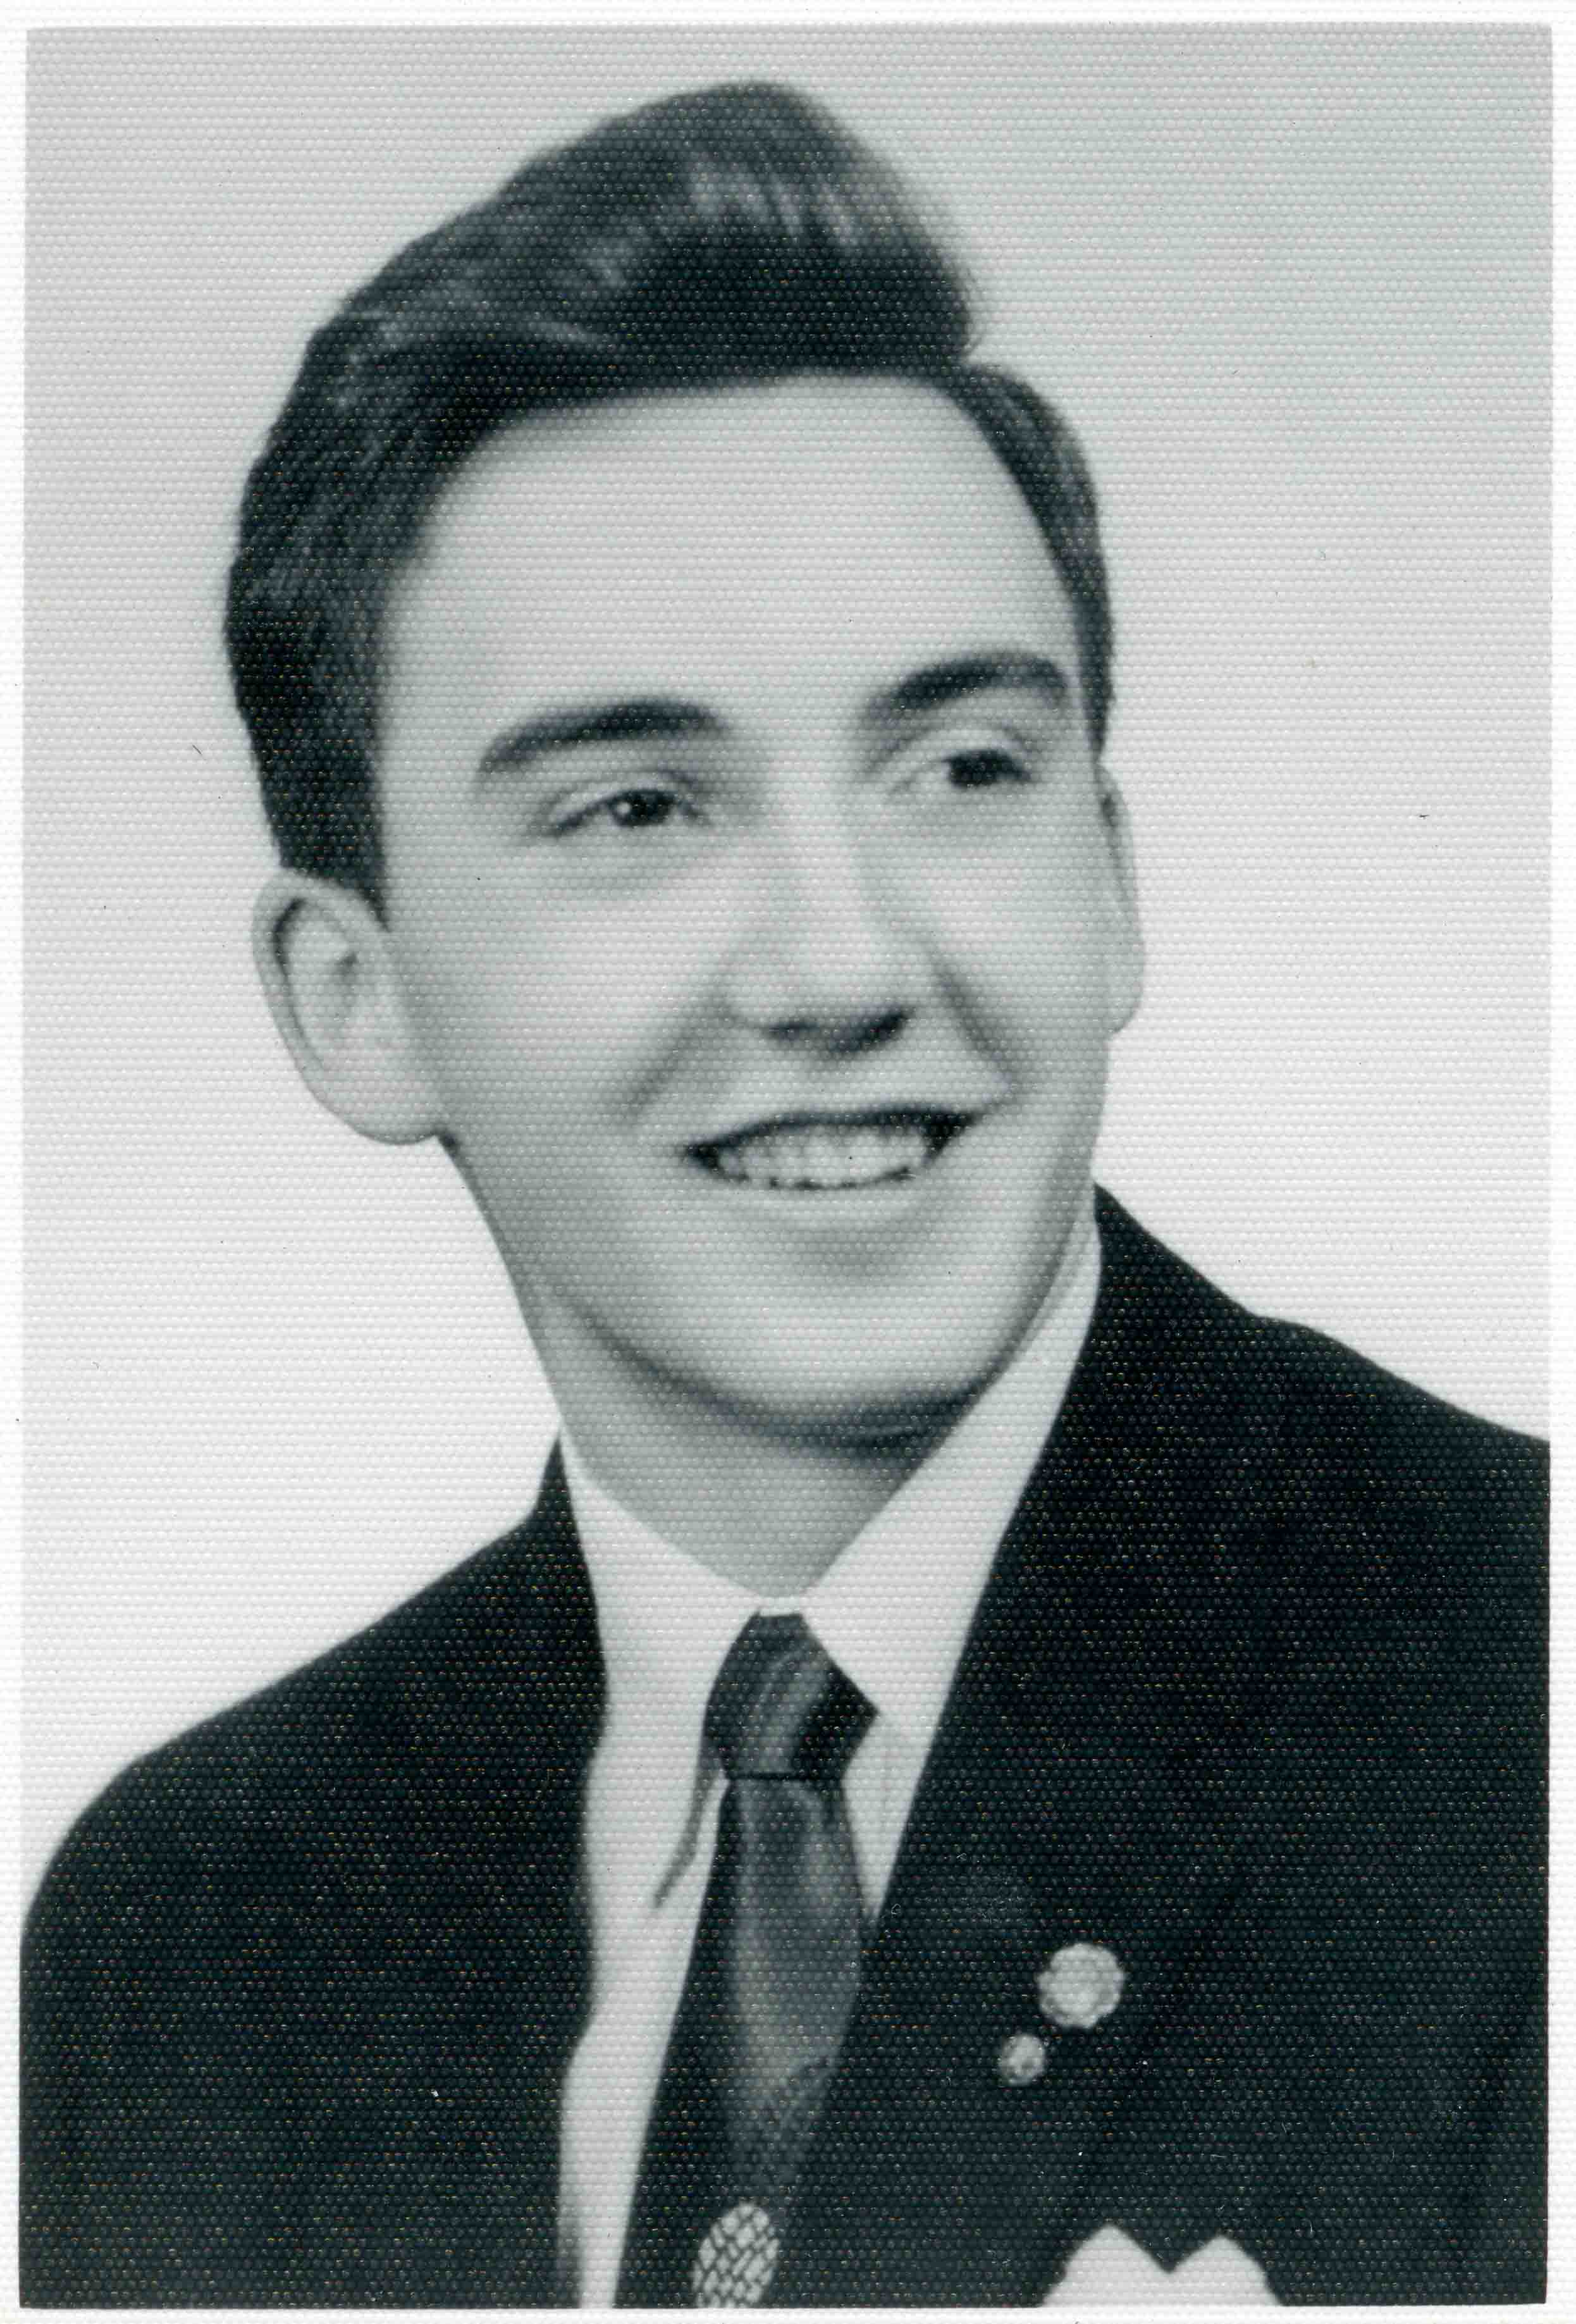 Probably his graduation picture (son of Bob Brooks)
Location:
Source Hazel Brooks Betler Houchin
Date:  1965 (approx)